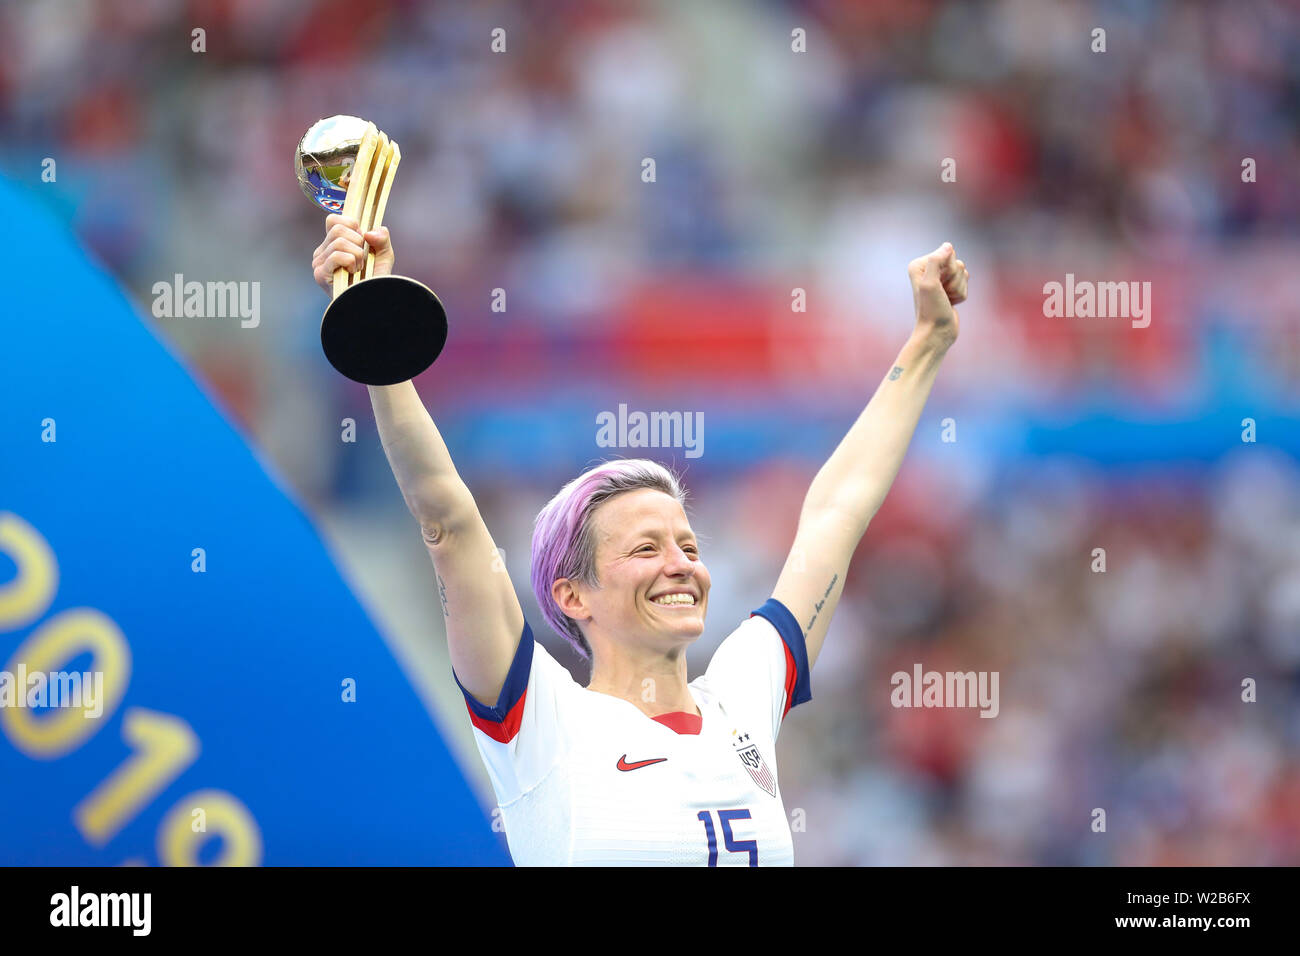 Lyon, France. 07th July, 2019. Rapinoe the United States during match against the Netherlands game valid for the Final of the Women 's Soccer World Cup in Lyon in France this Sunday, 07. Credit: Brazil Photo Press/Alamy Live News Stock Photo